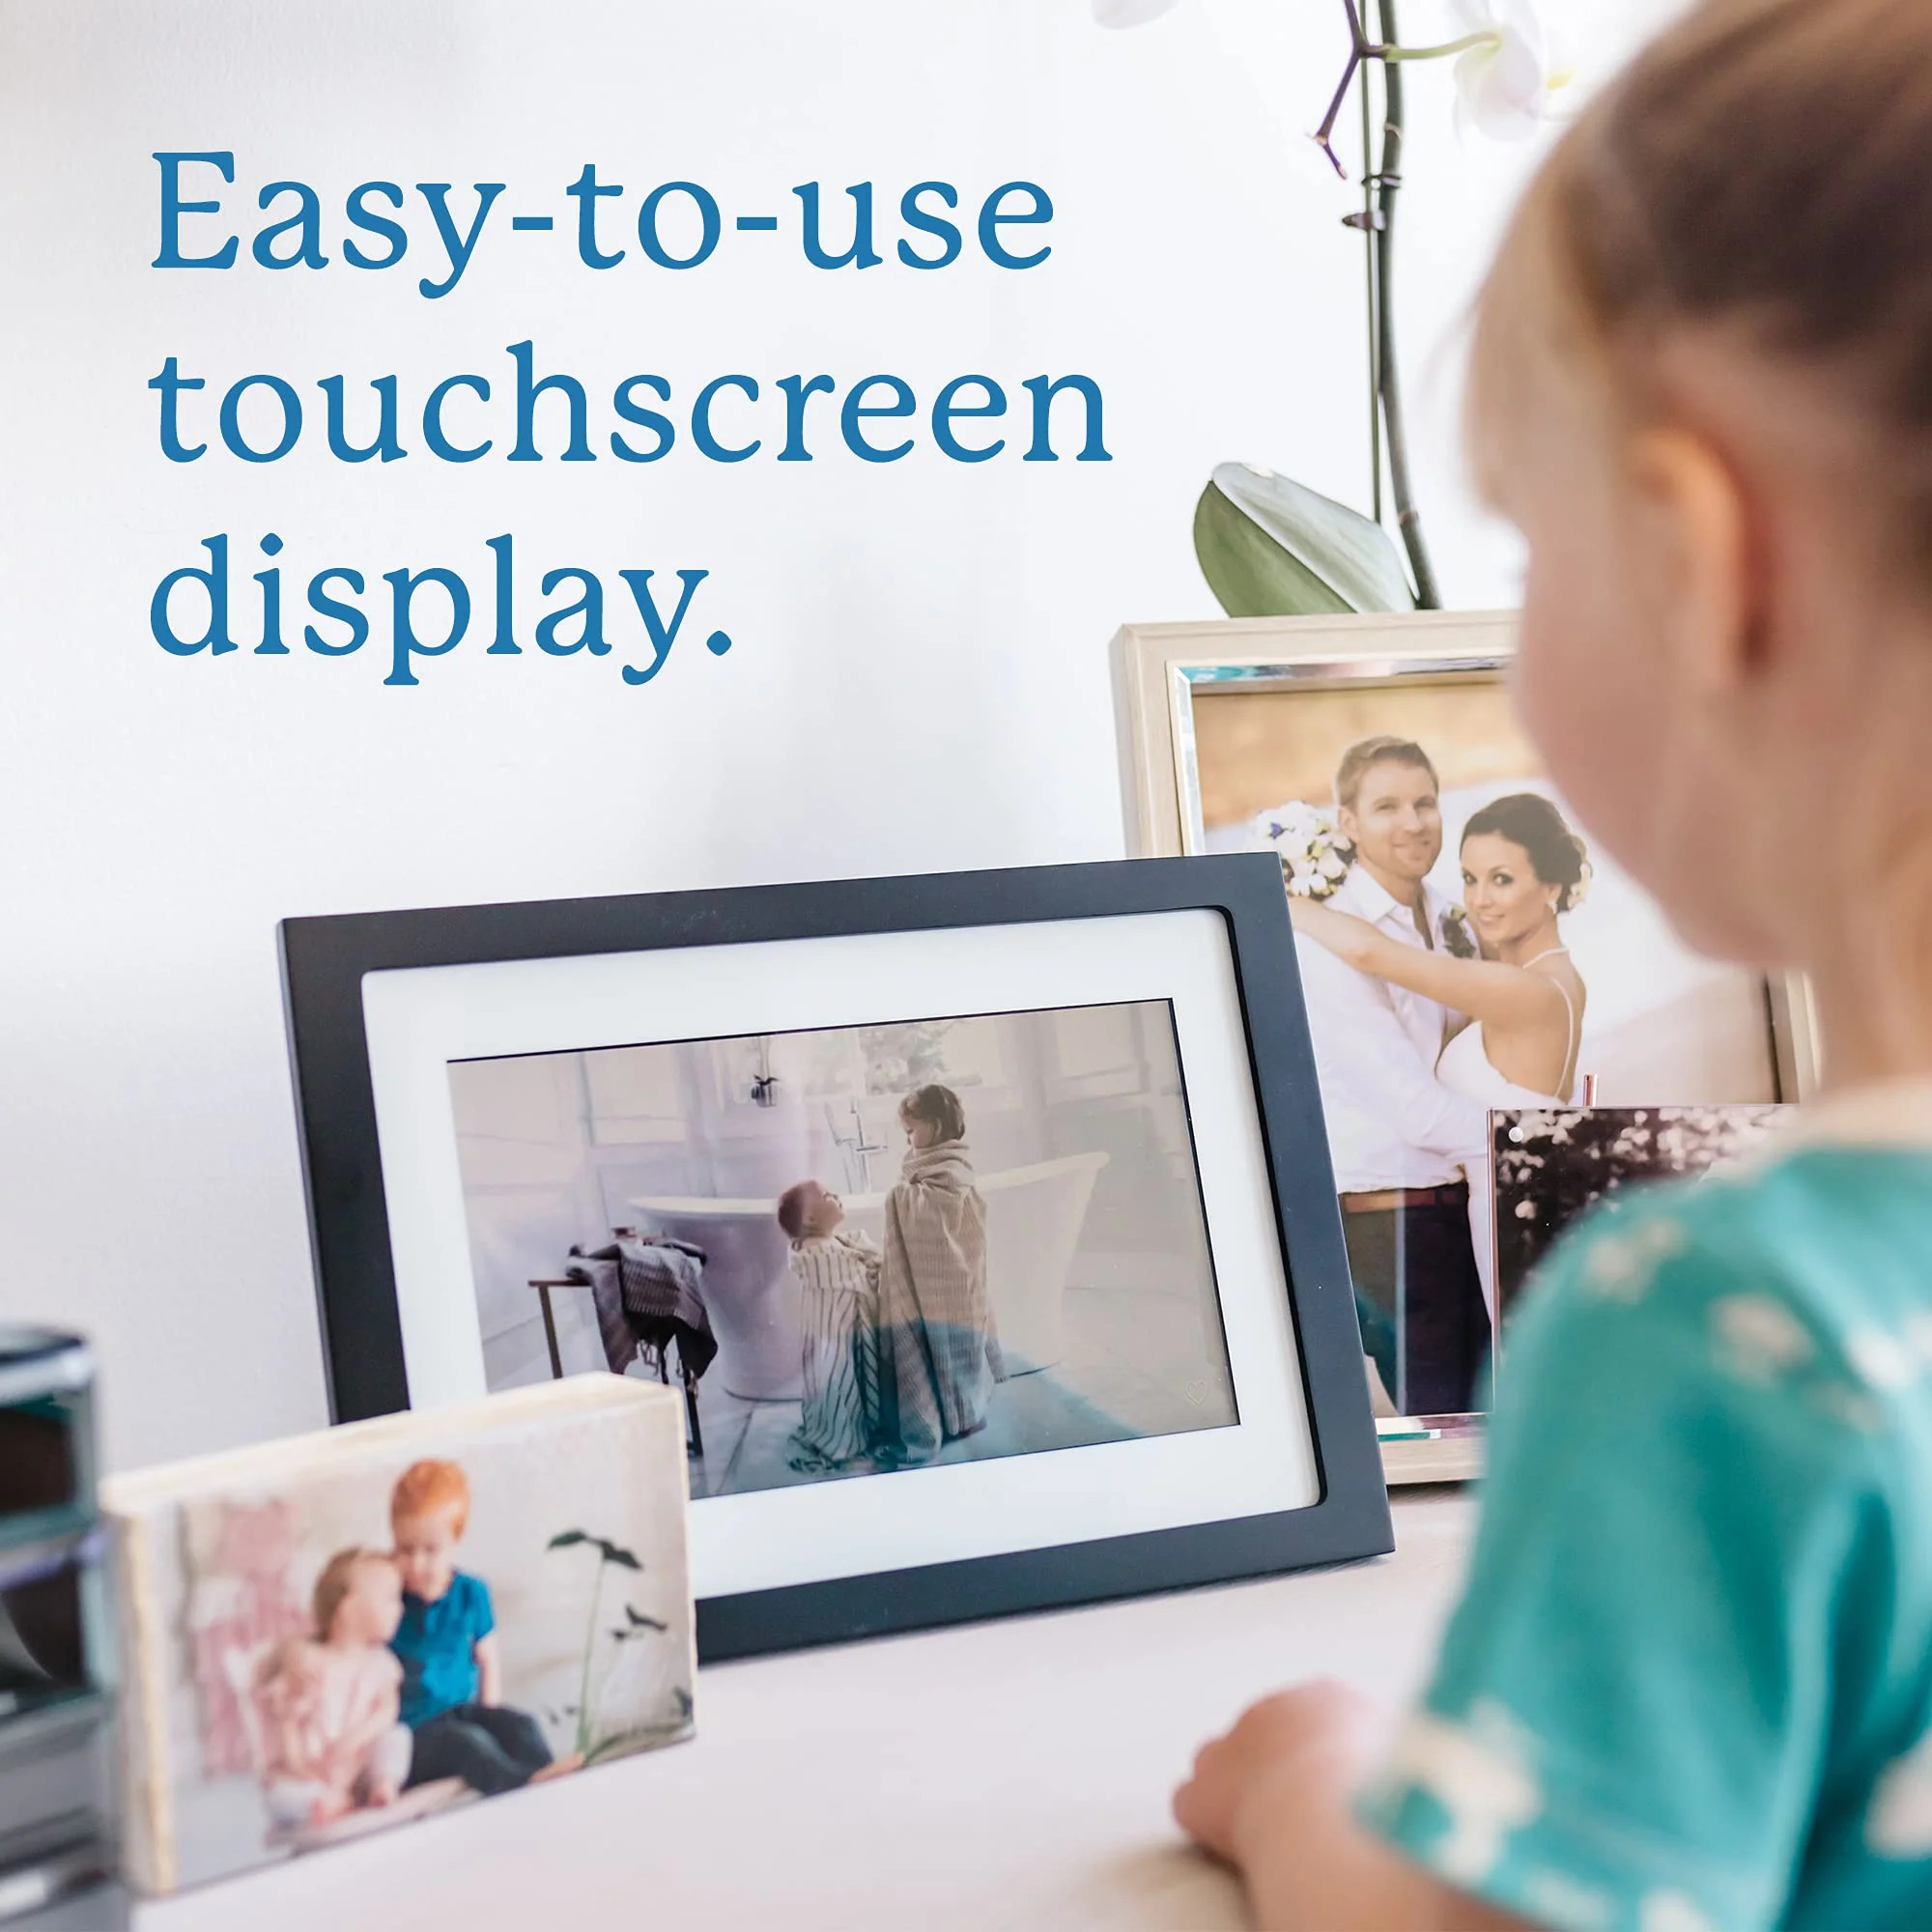 Skylight Frame: 10-inch Wifi Digital Picture Frame, Email Photos from Anywhere, Touch Screen Display - image 5 of 7